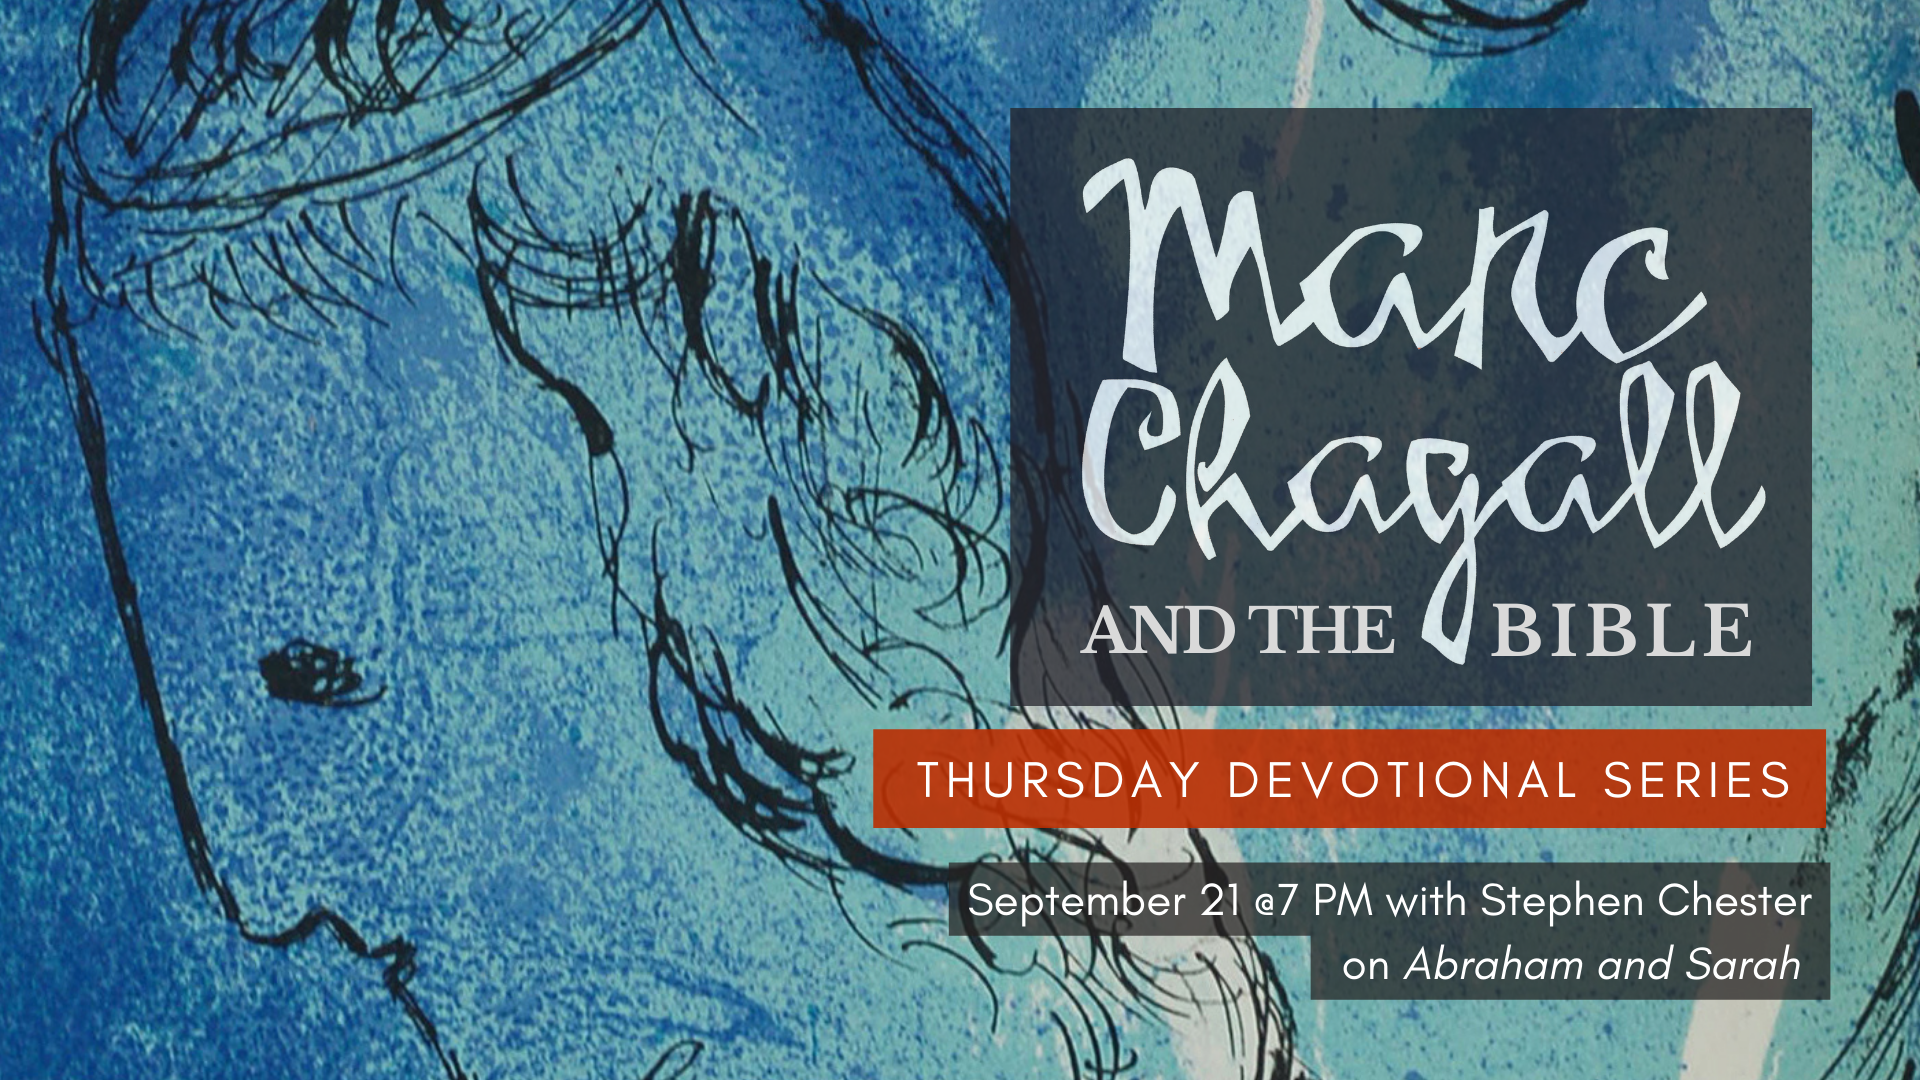 Marc Chagall and the Bible with Stephen Chester - Abraham and Sarah